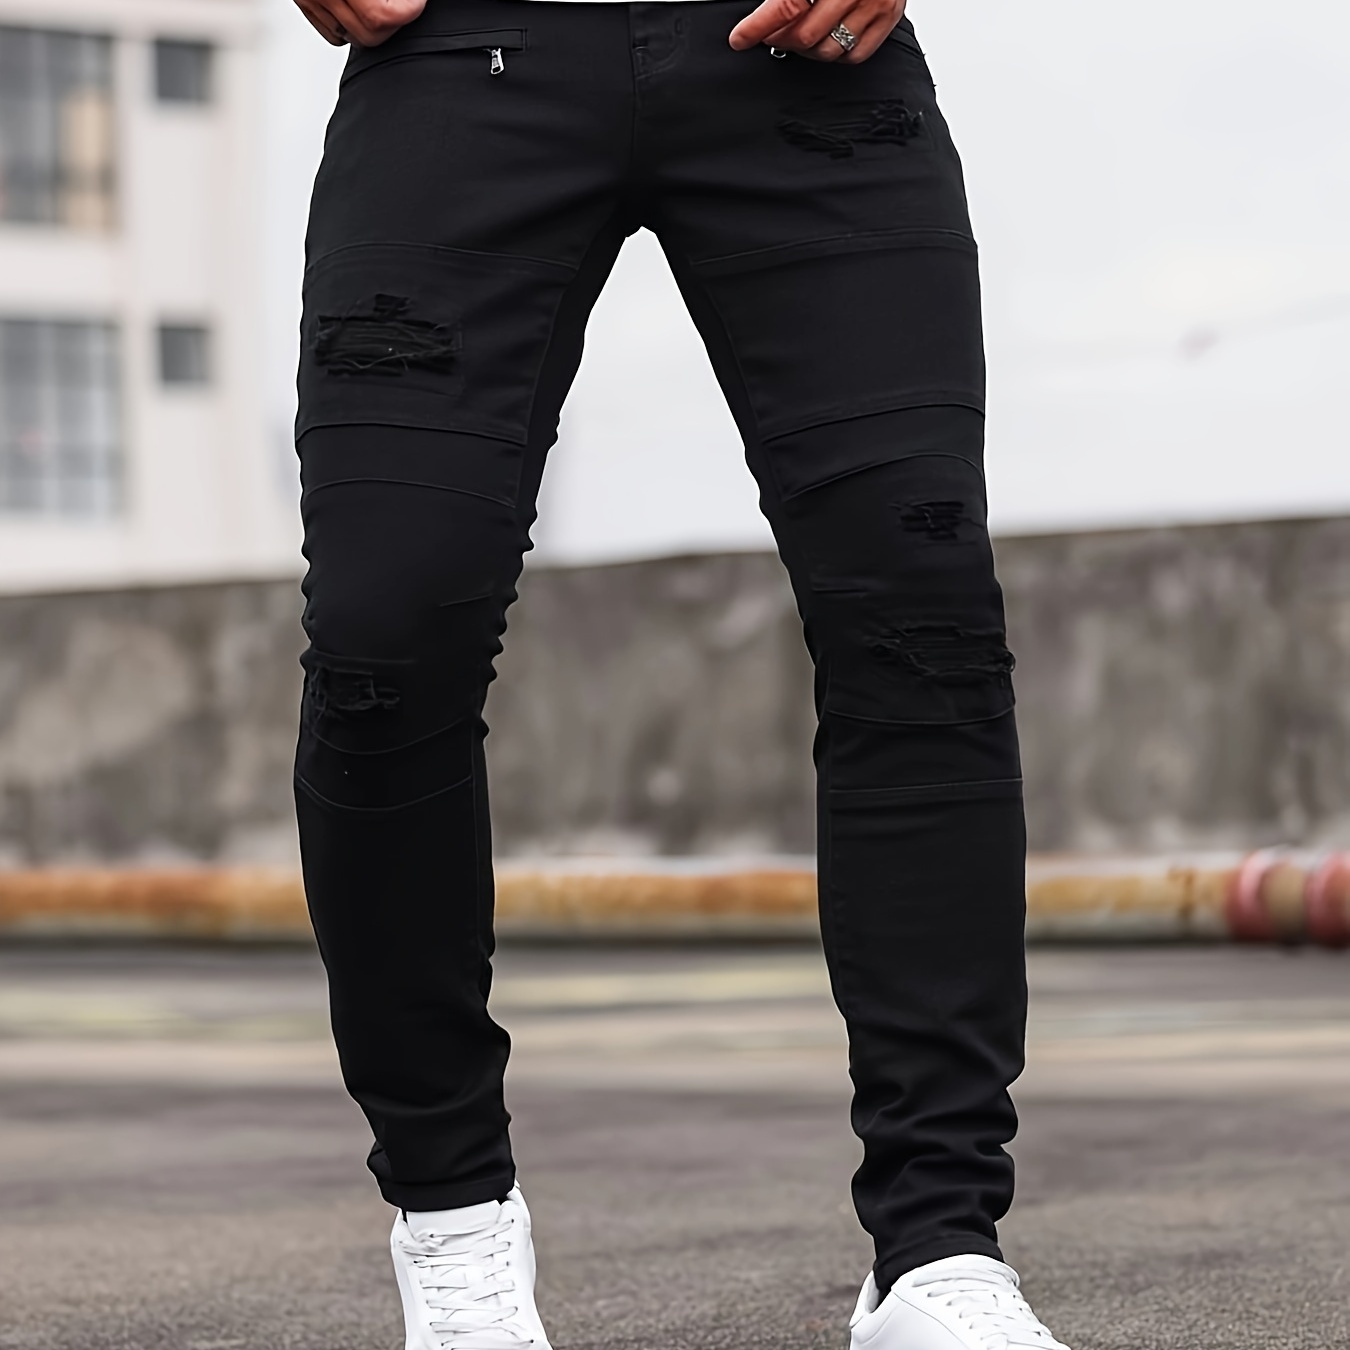 

Men's Solid Cotton Ripped Distressed Jeans, Chic Street Style Slim Fit Bottoms For Men, All Seasons